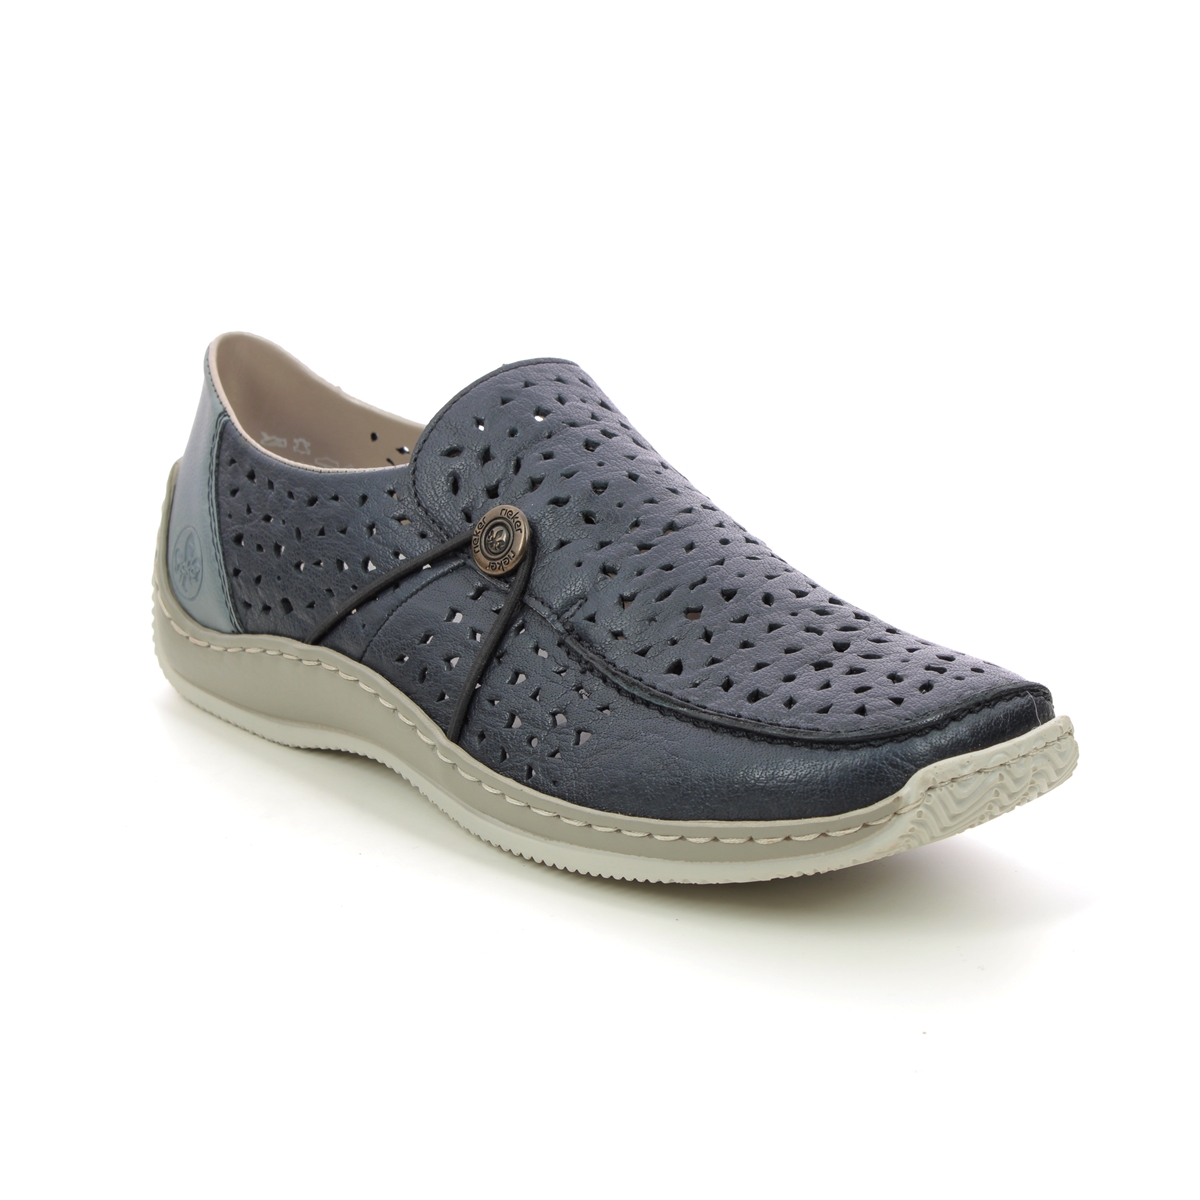 Rieker Celiaperf Navy Leather Womens Comfort Slip On Shoes L1766-14 In Size 41 In Plain Navy Leather  Minato Ladies